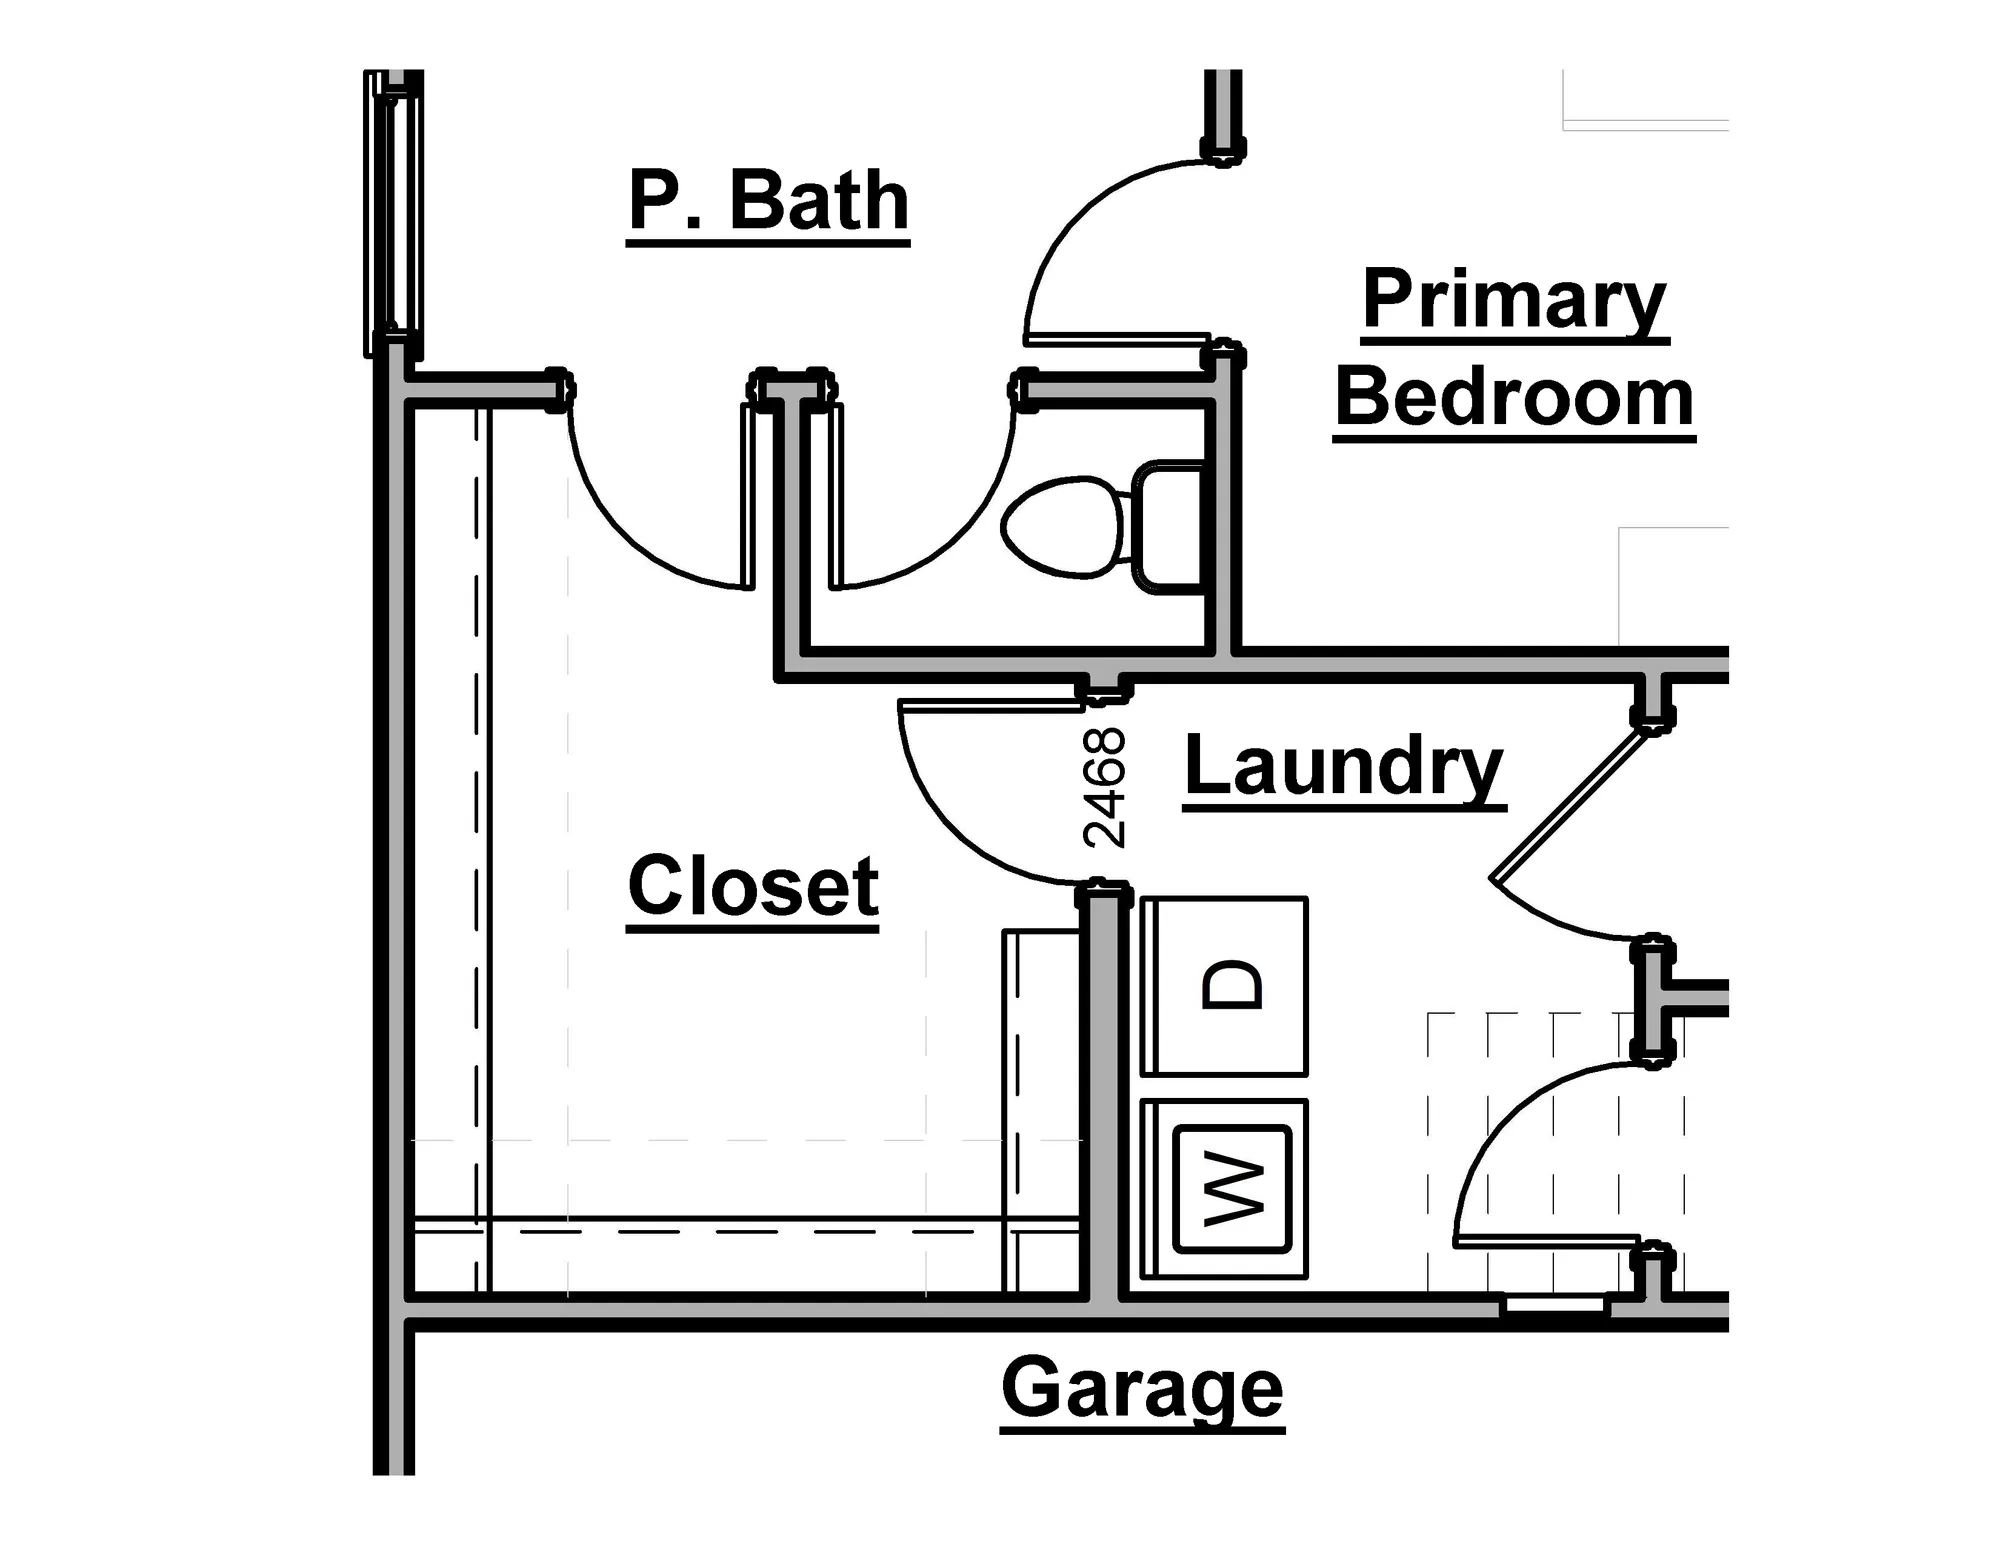 Primary Closet Door to Laundry Room Option - undefined